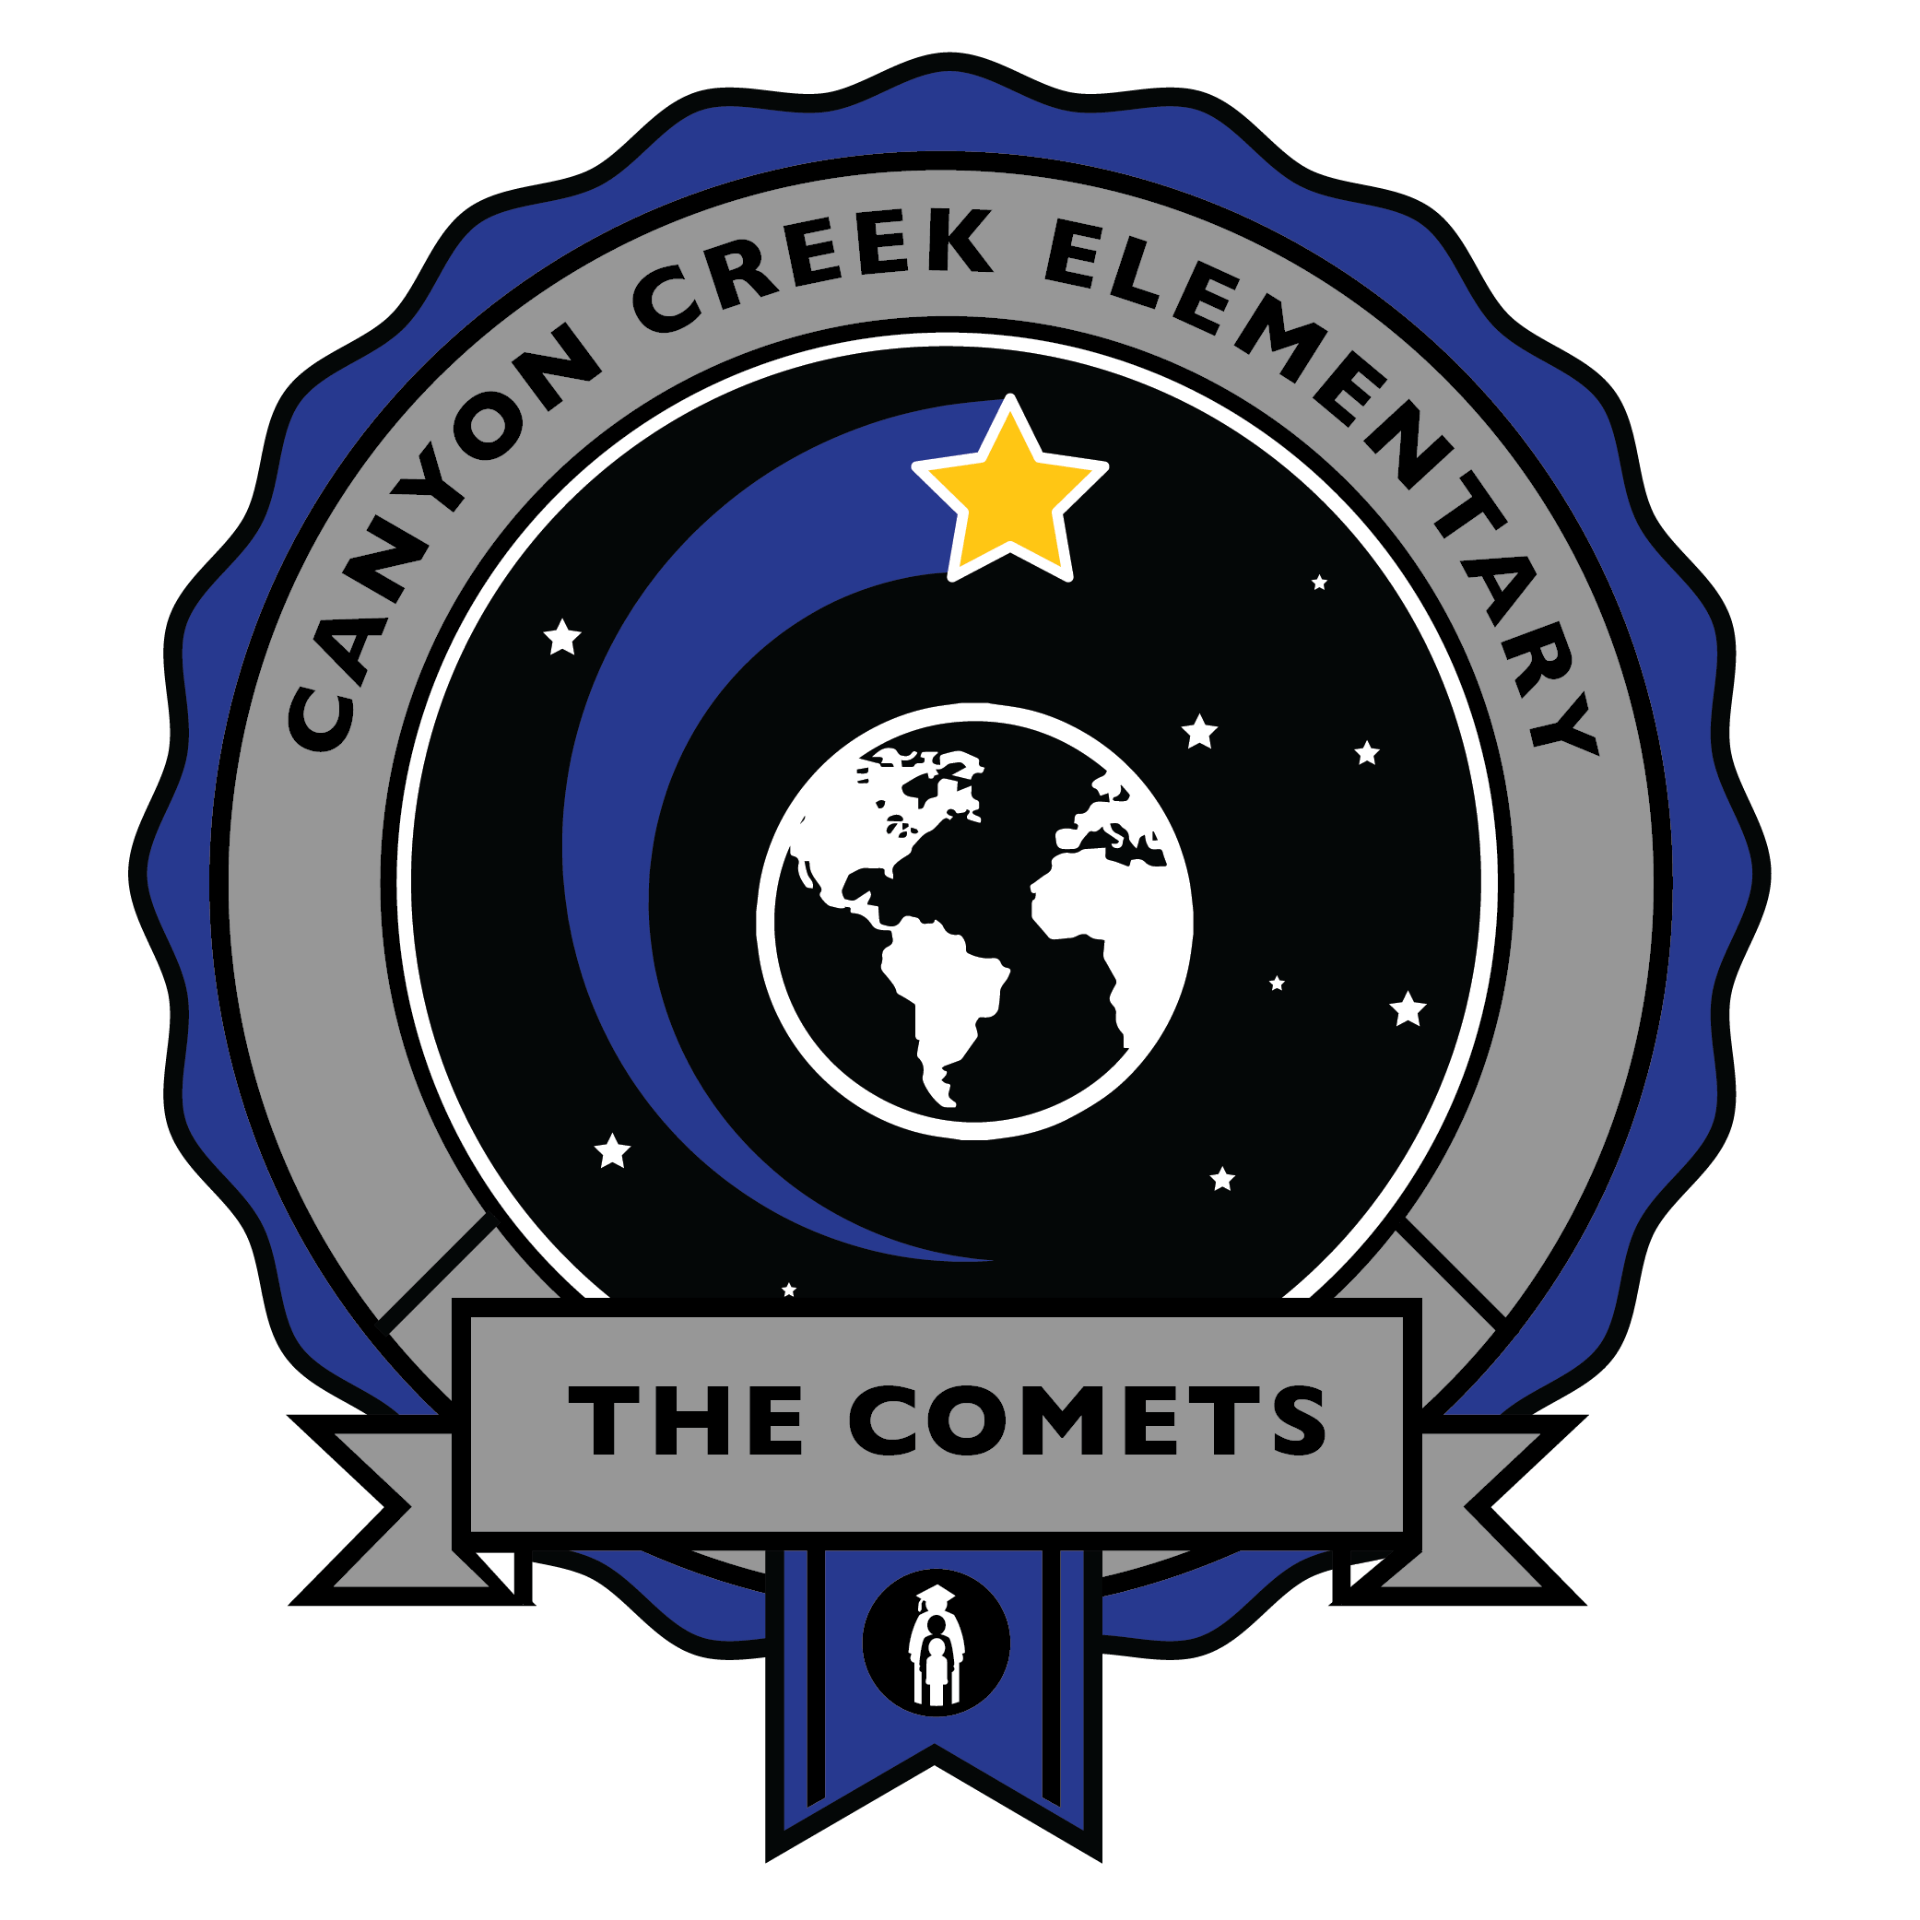 Canyon Creek Comets, Orbiting in Excellence